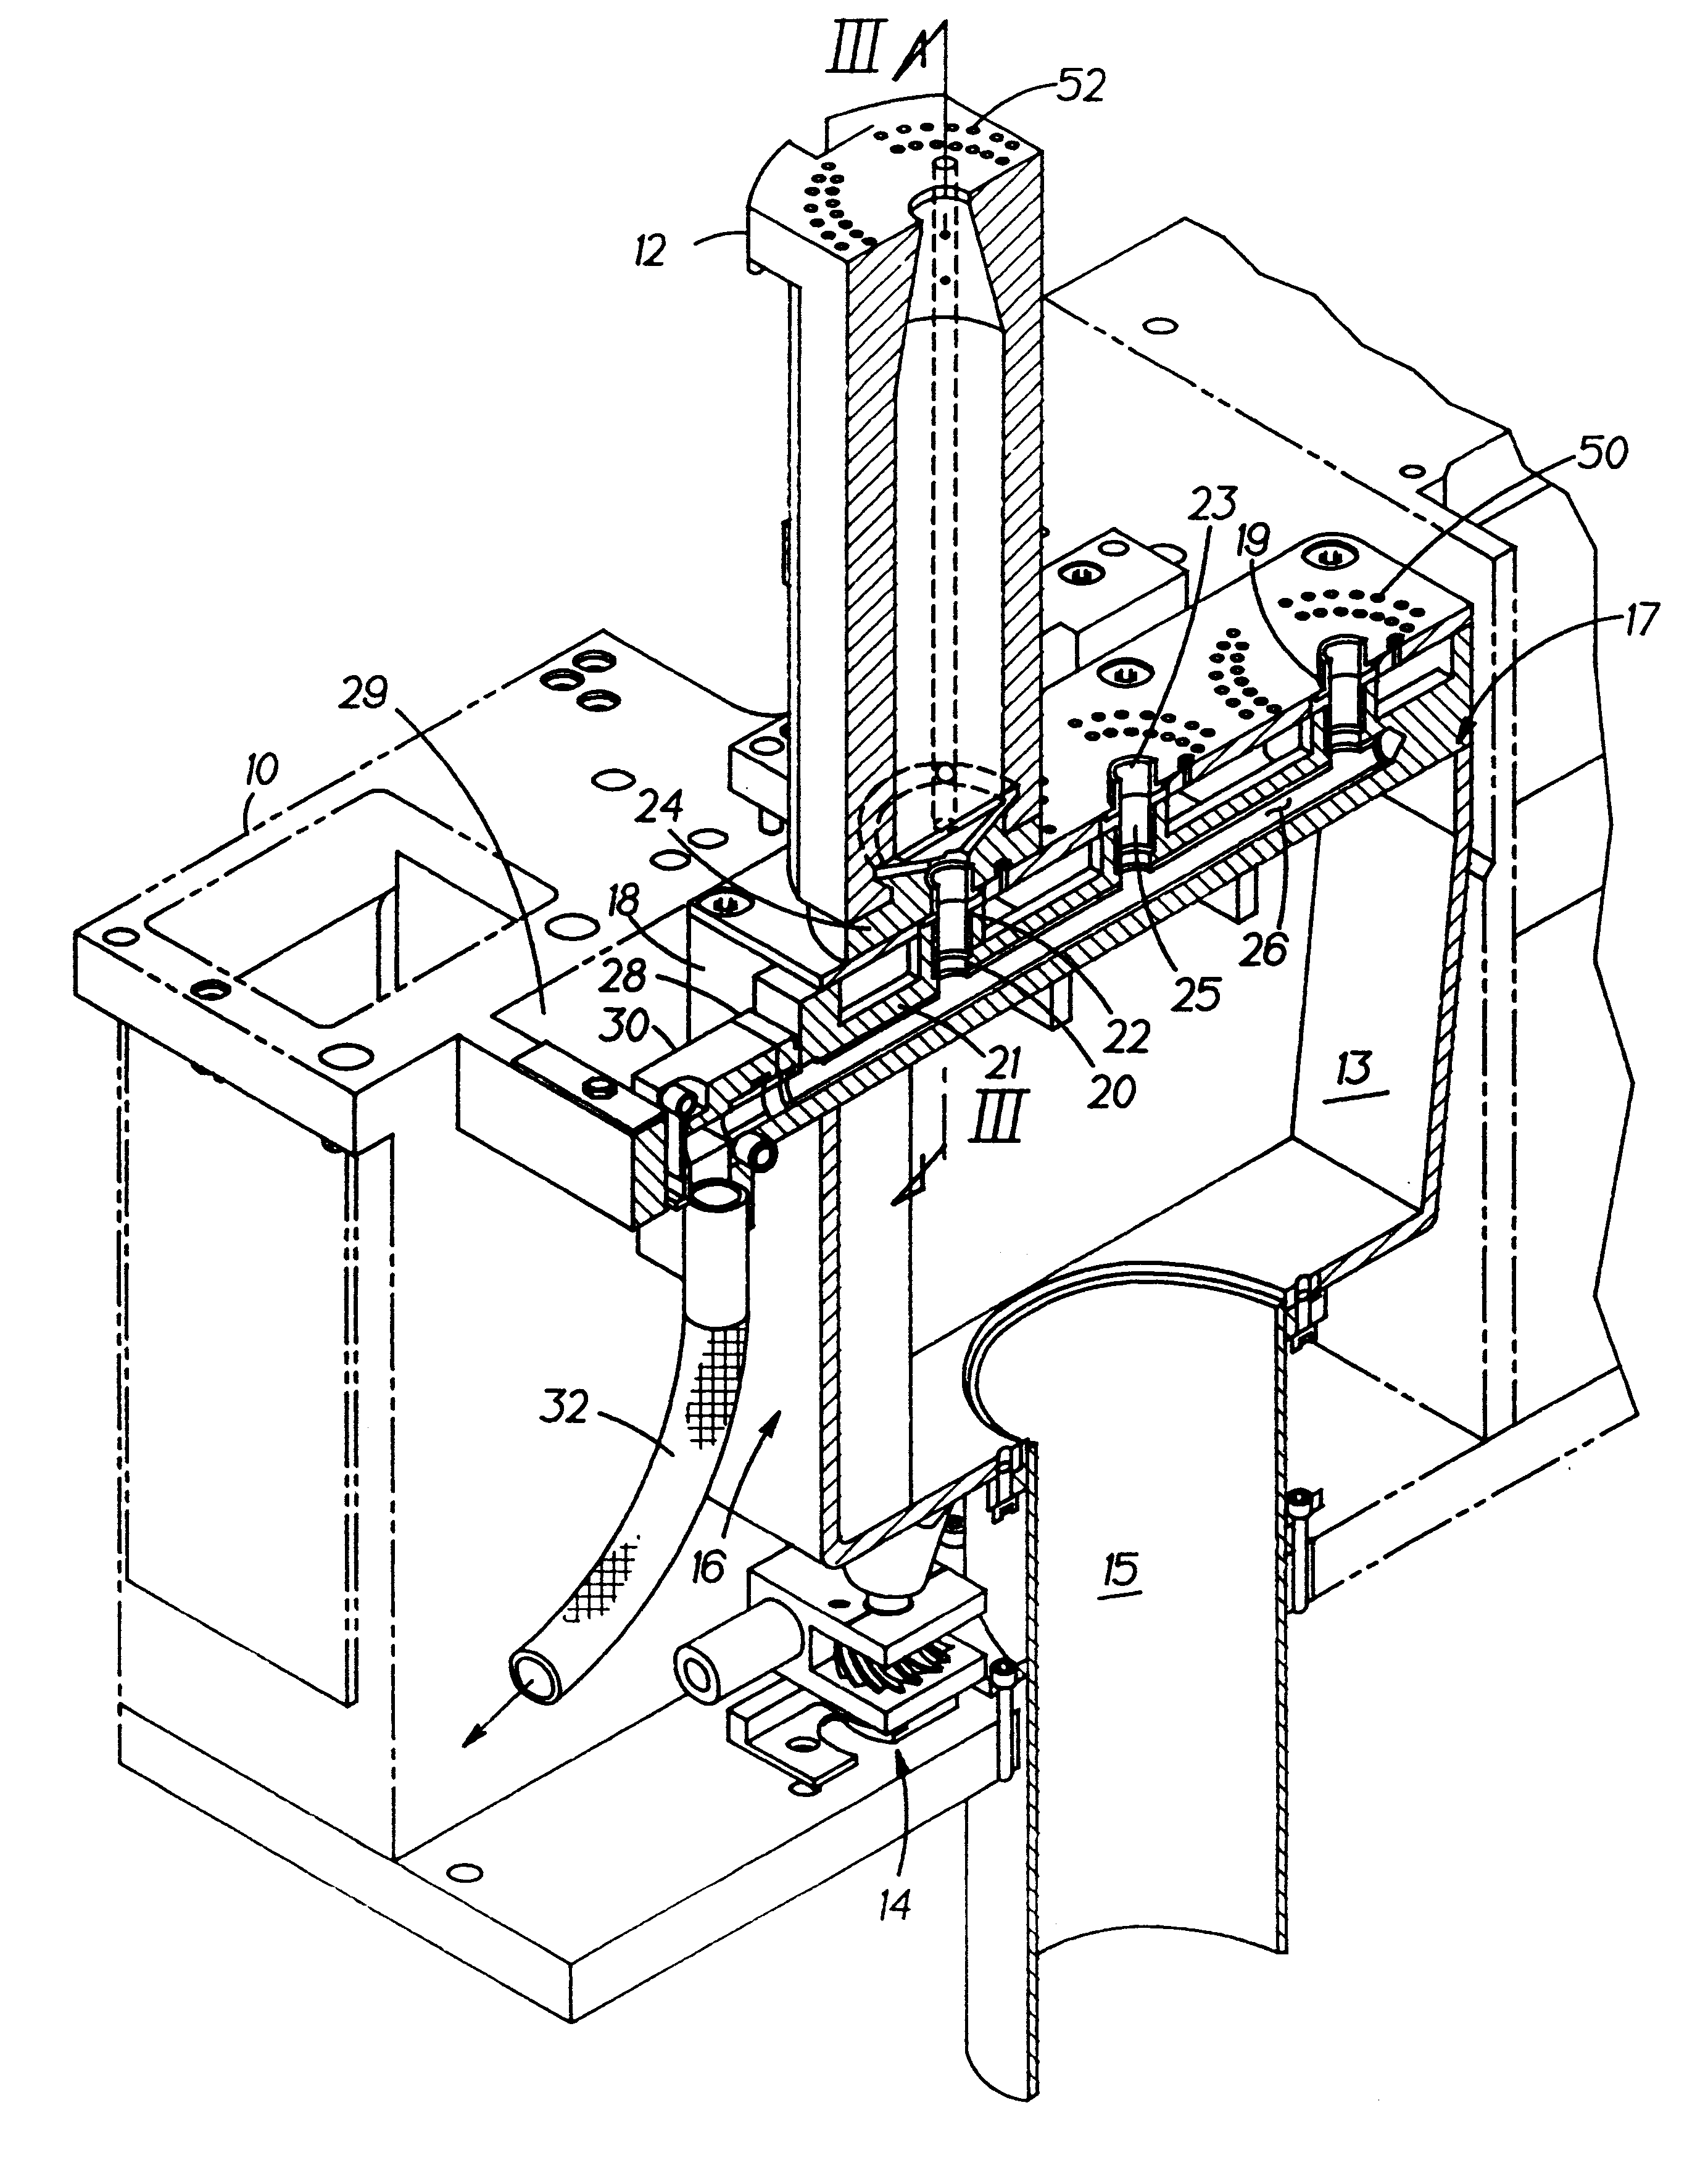 Vacuum system for an I.S. machine